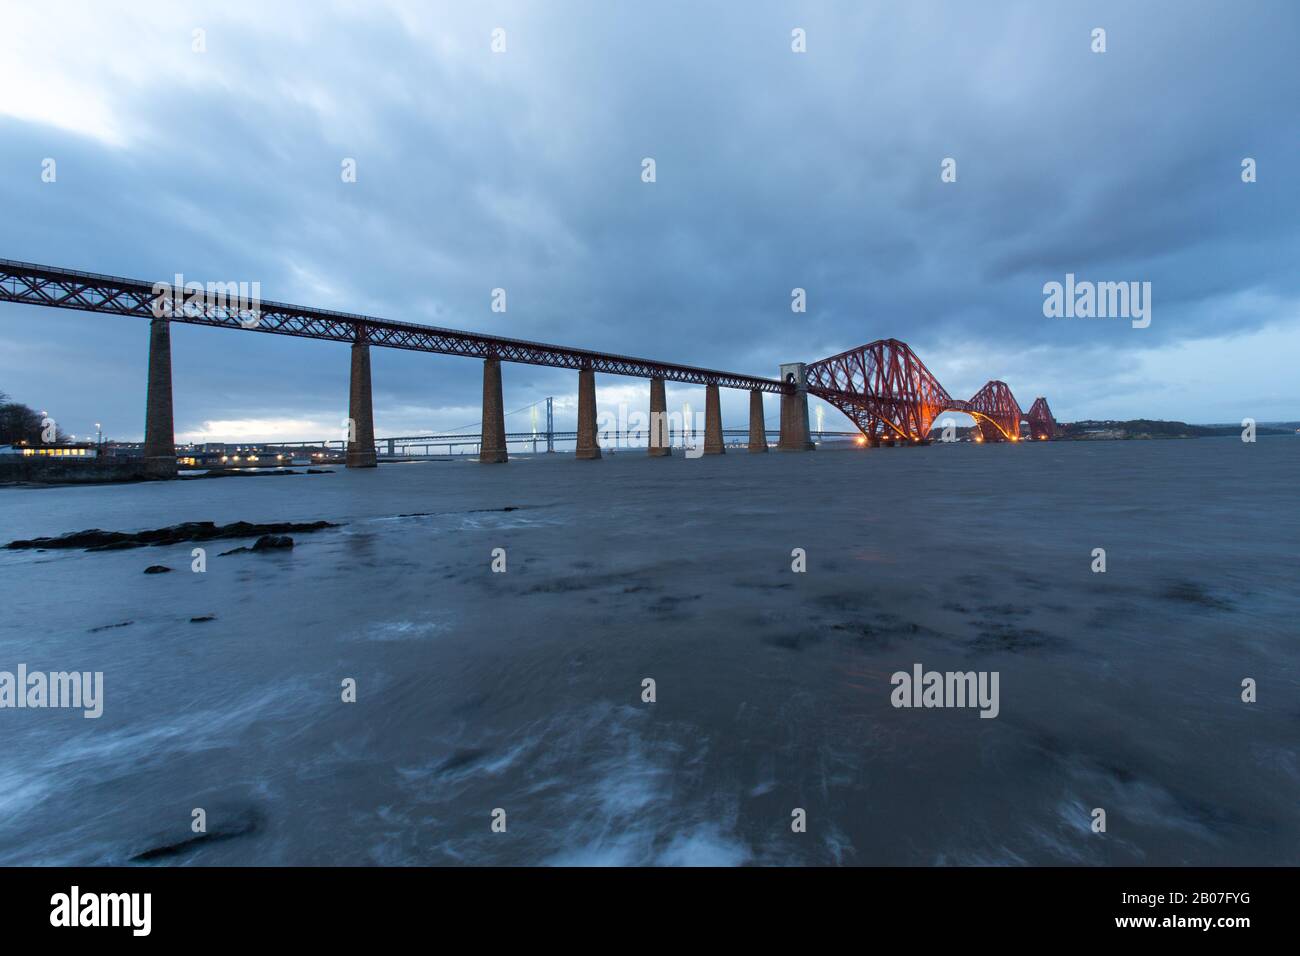 City of Edinburgh, Scotland. Picturesque dusk view of the Forth Rail Bridge, over the River Forth. Stock Photo